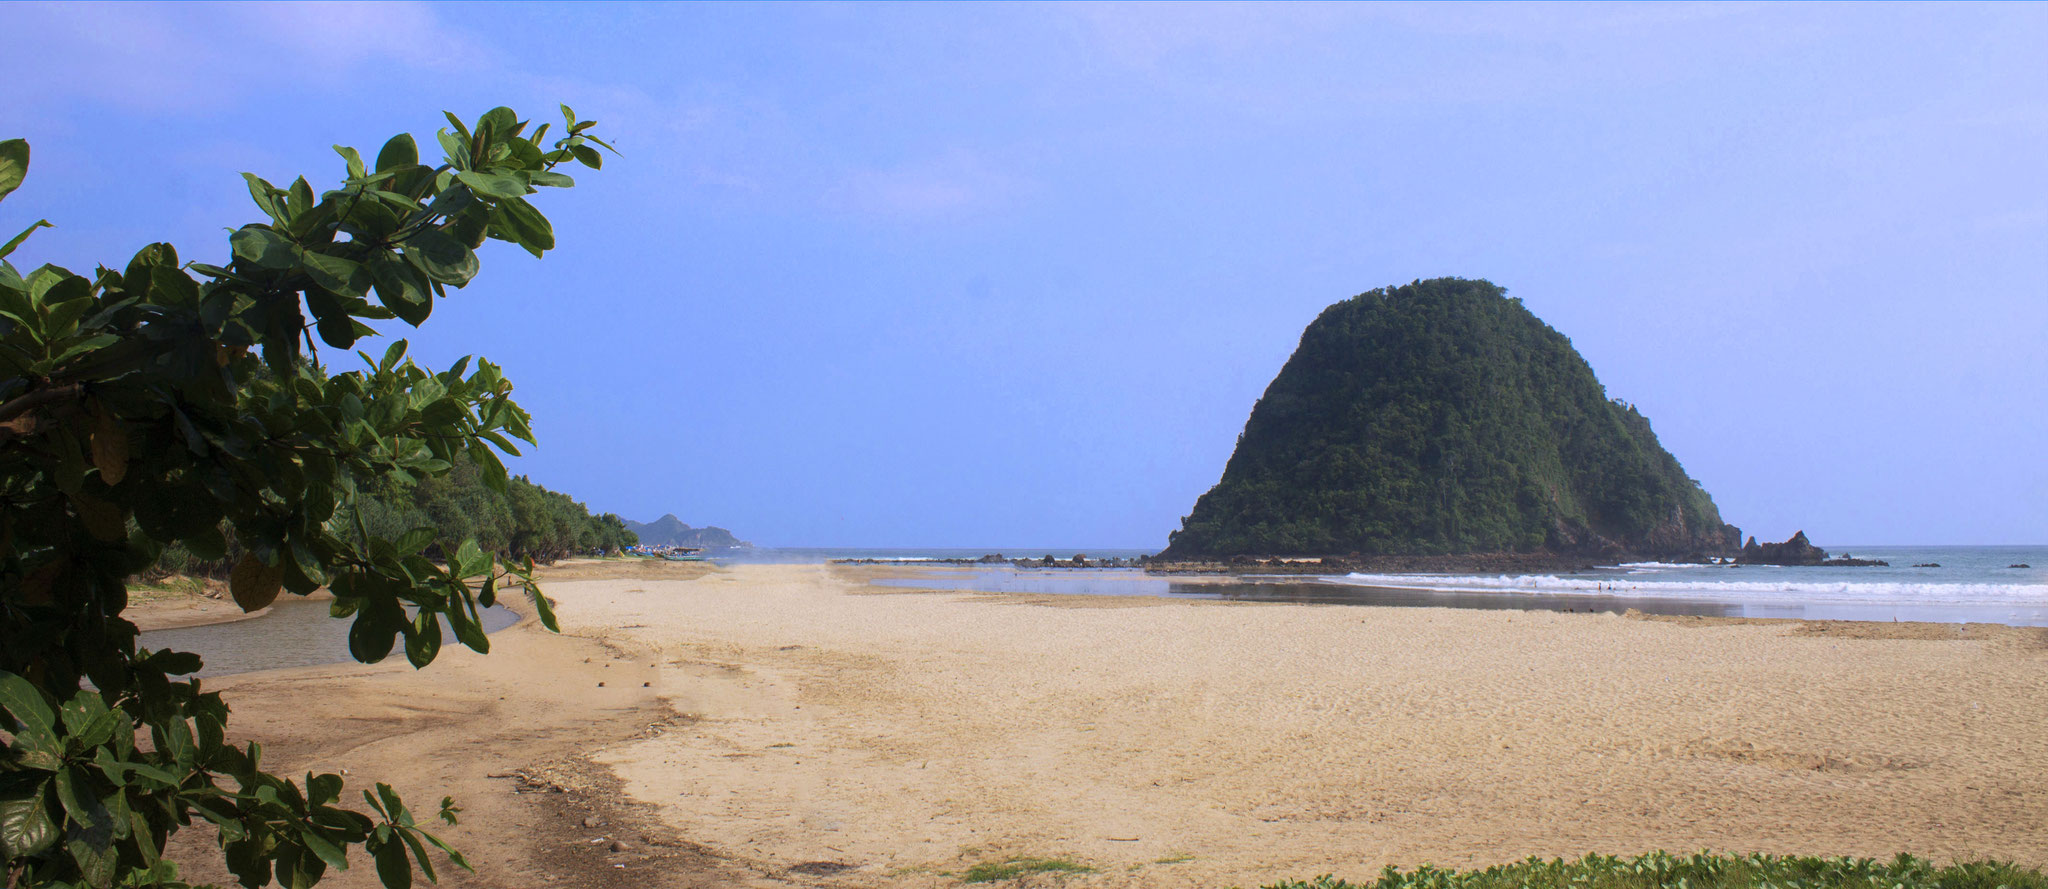 Pantai Tour: swim in lost creeks away from the hustle amd bustle.